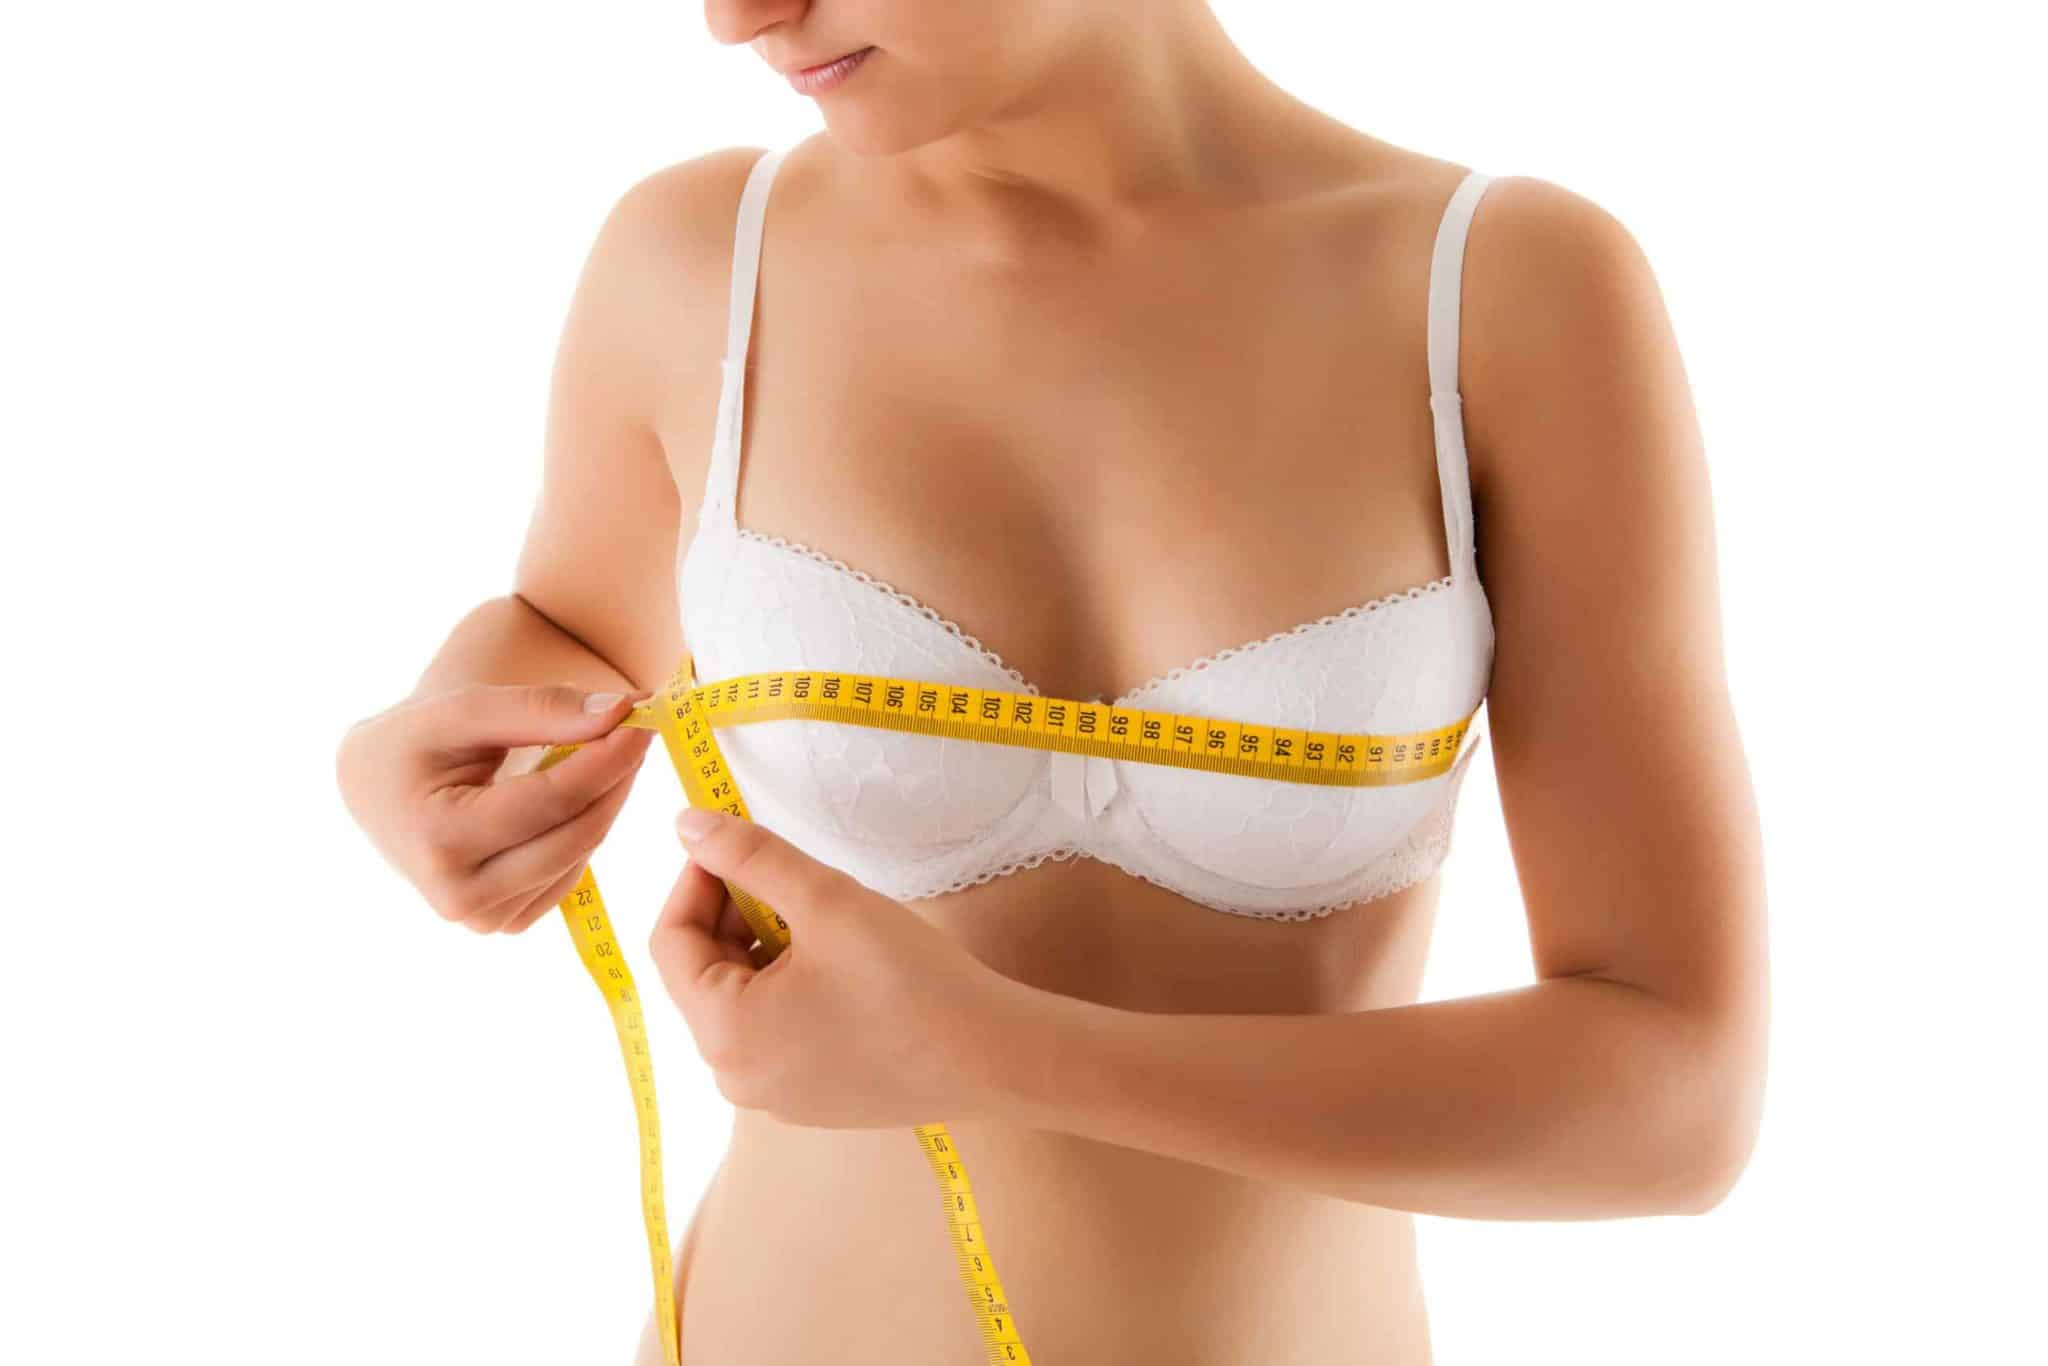 Small breasts: why you have them and what to do about it